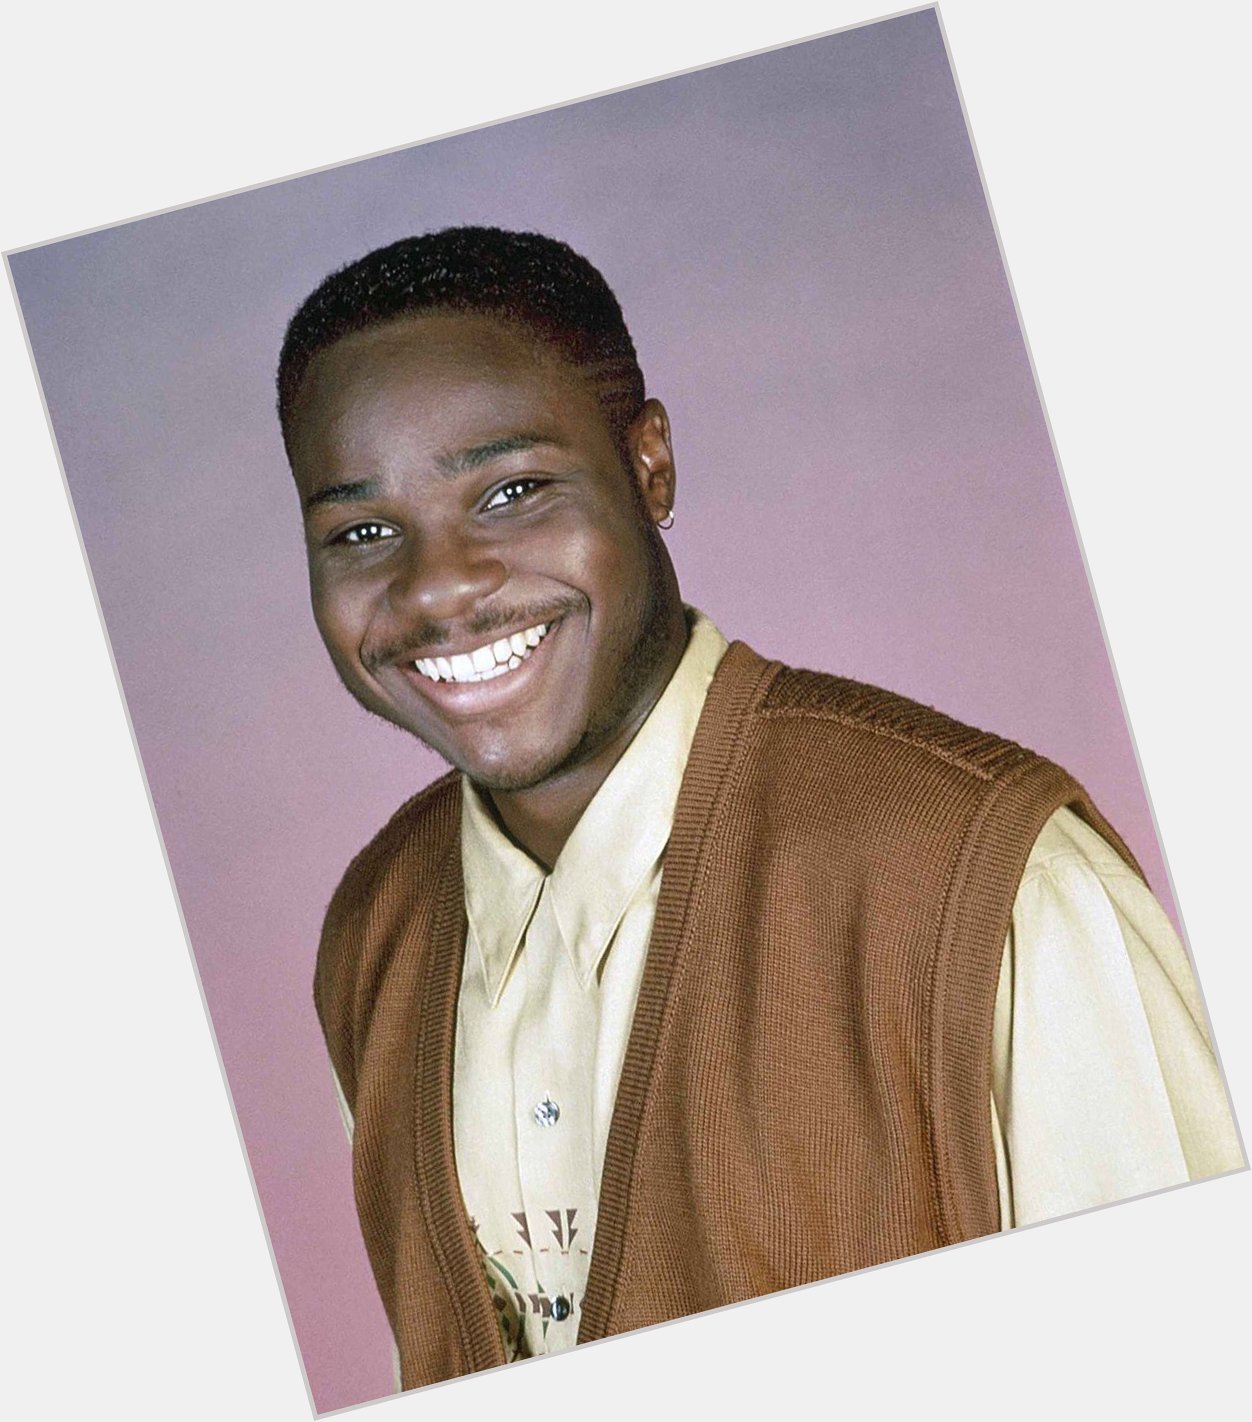 Wishing Malcolm-Jamal Warner a happy 48th birthday! Watch him play Theo Huxtable on The Cosby Show . 